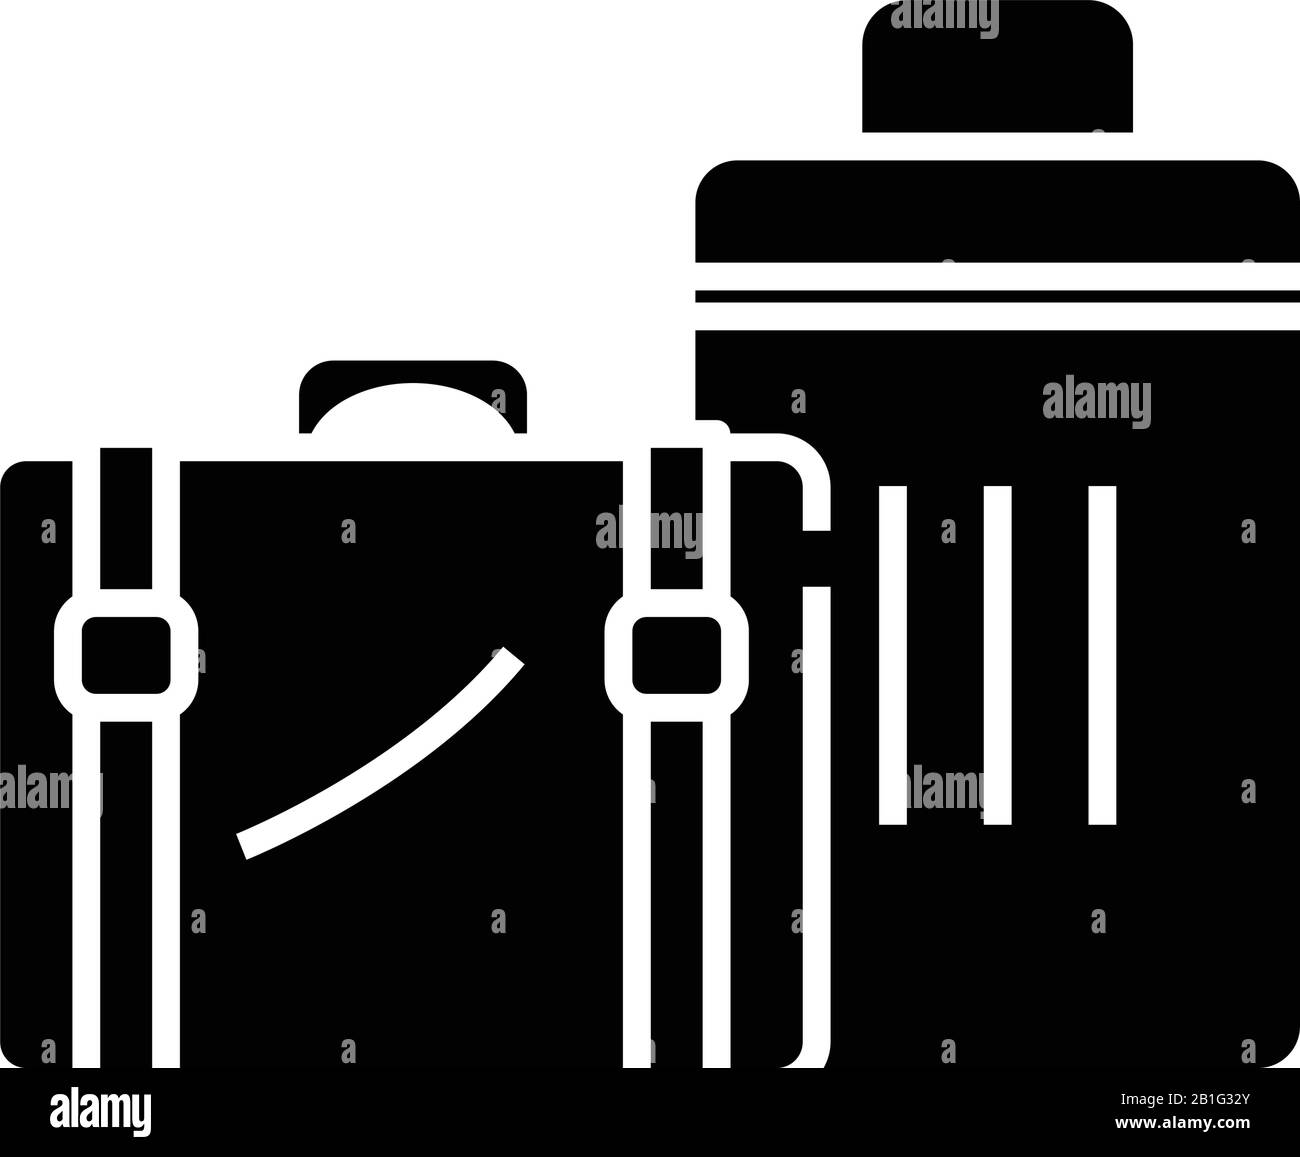 Big suitcases black icon, concept illustration, vector flat symbol, glyph sign. Stock Vector